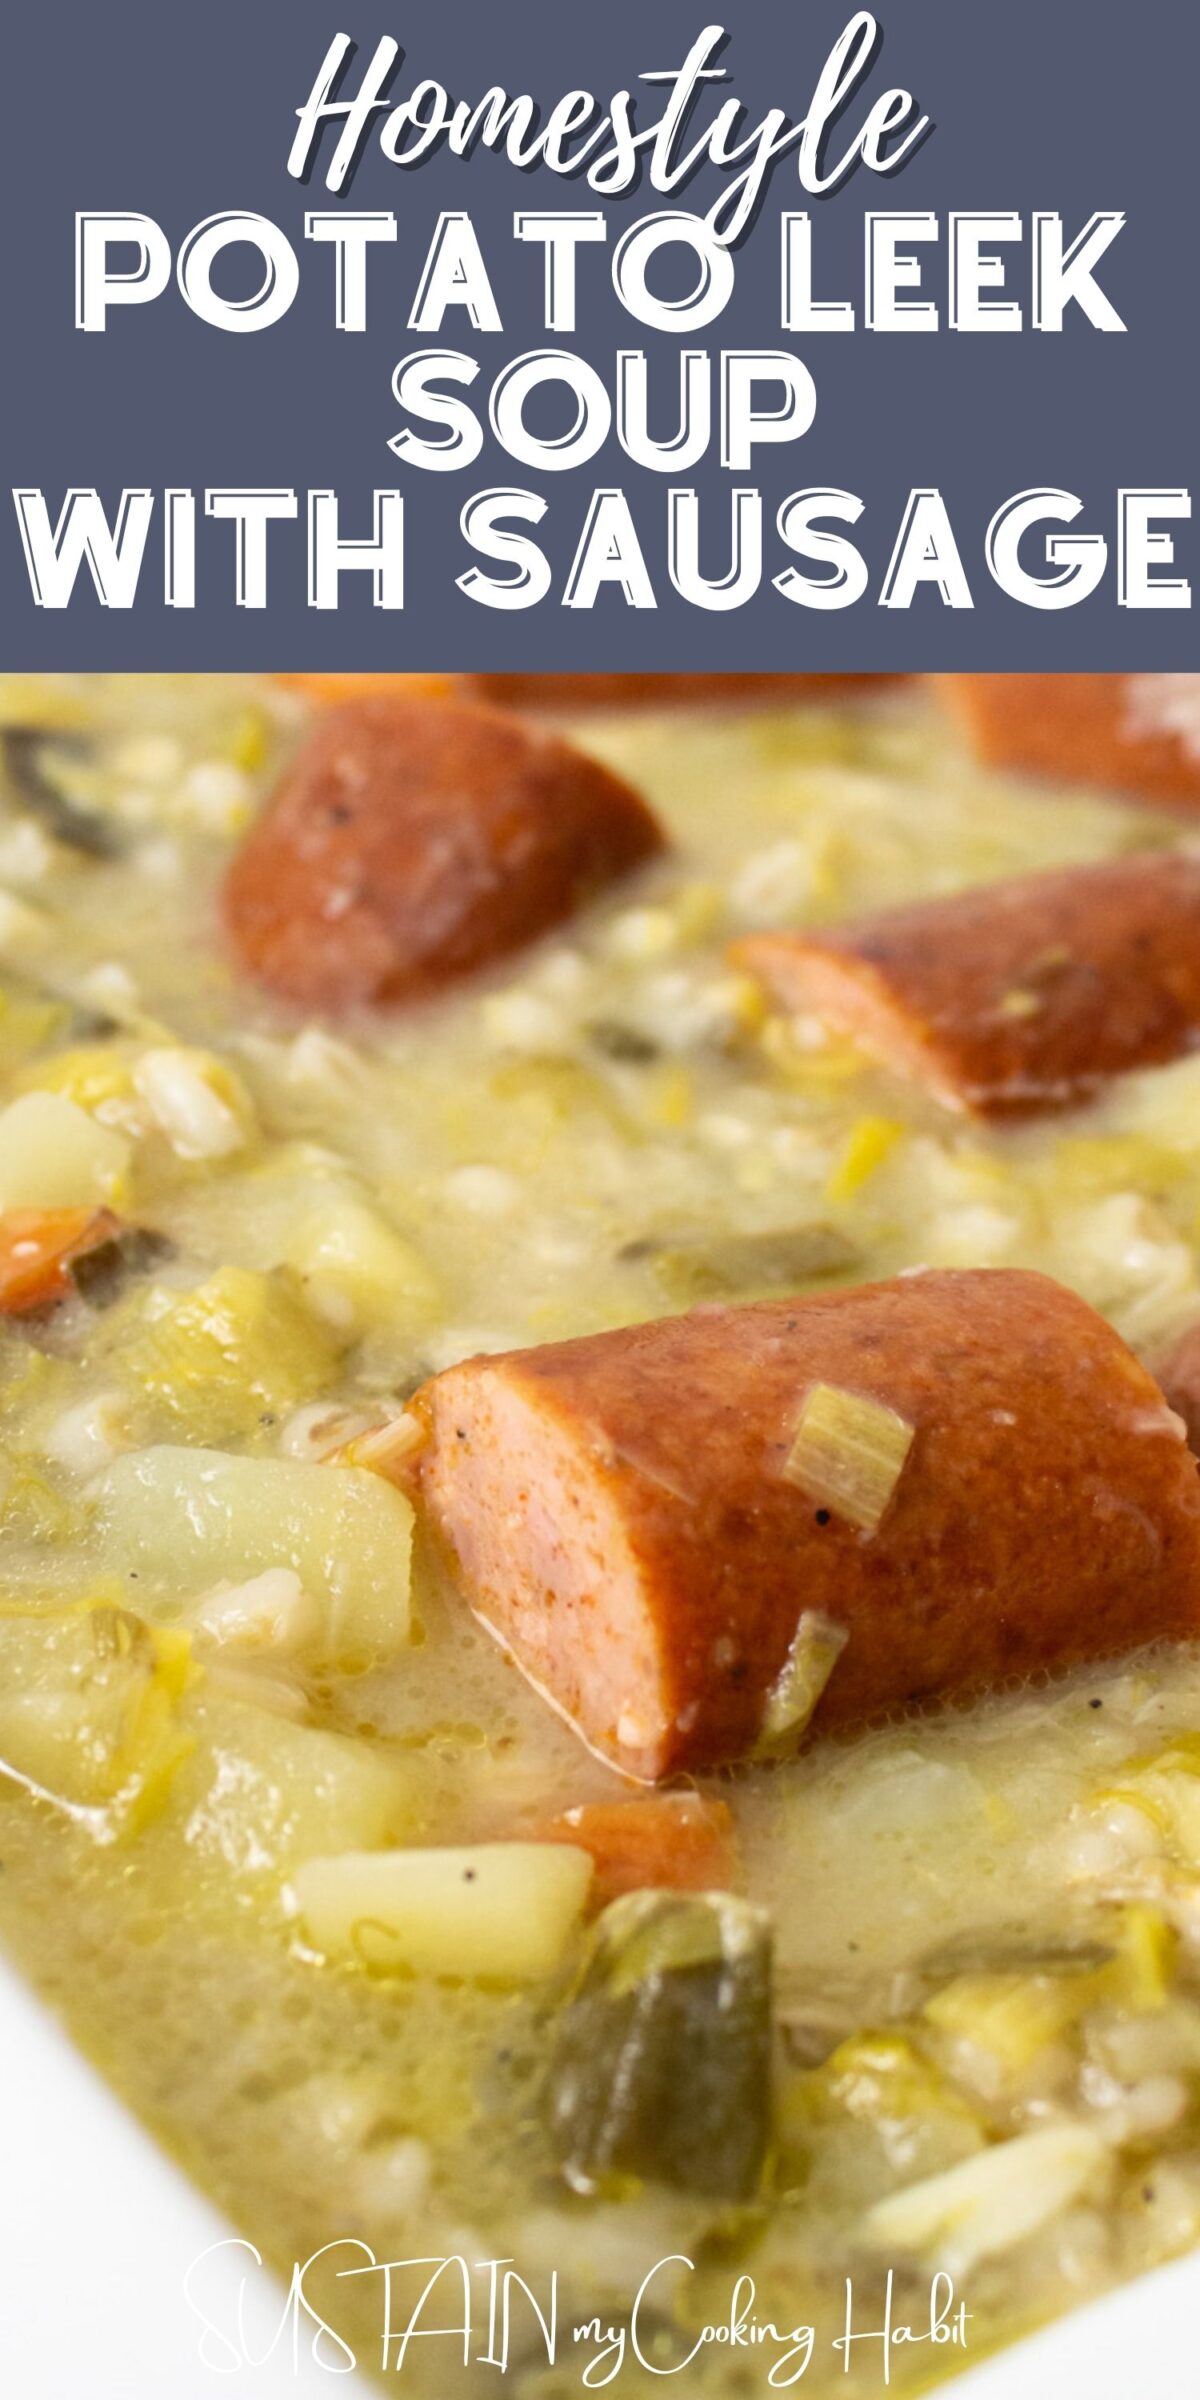 Close up of leek and sausage soup in a bowl with text overlay.